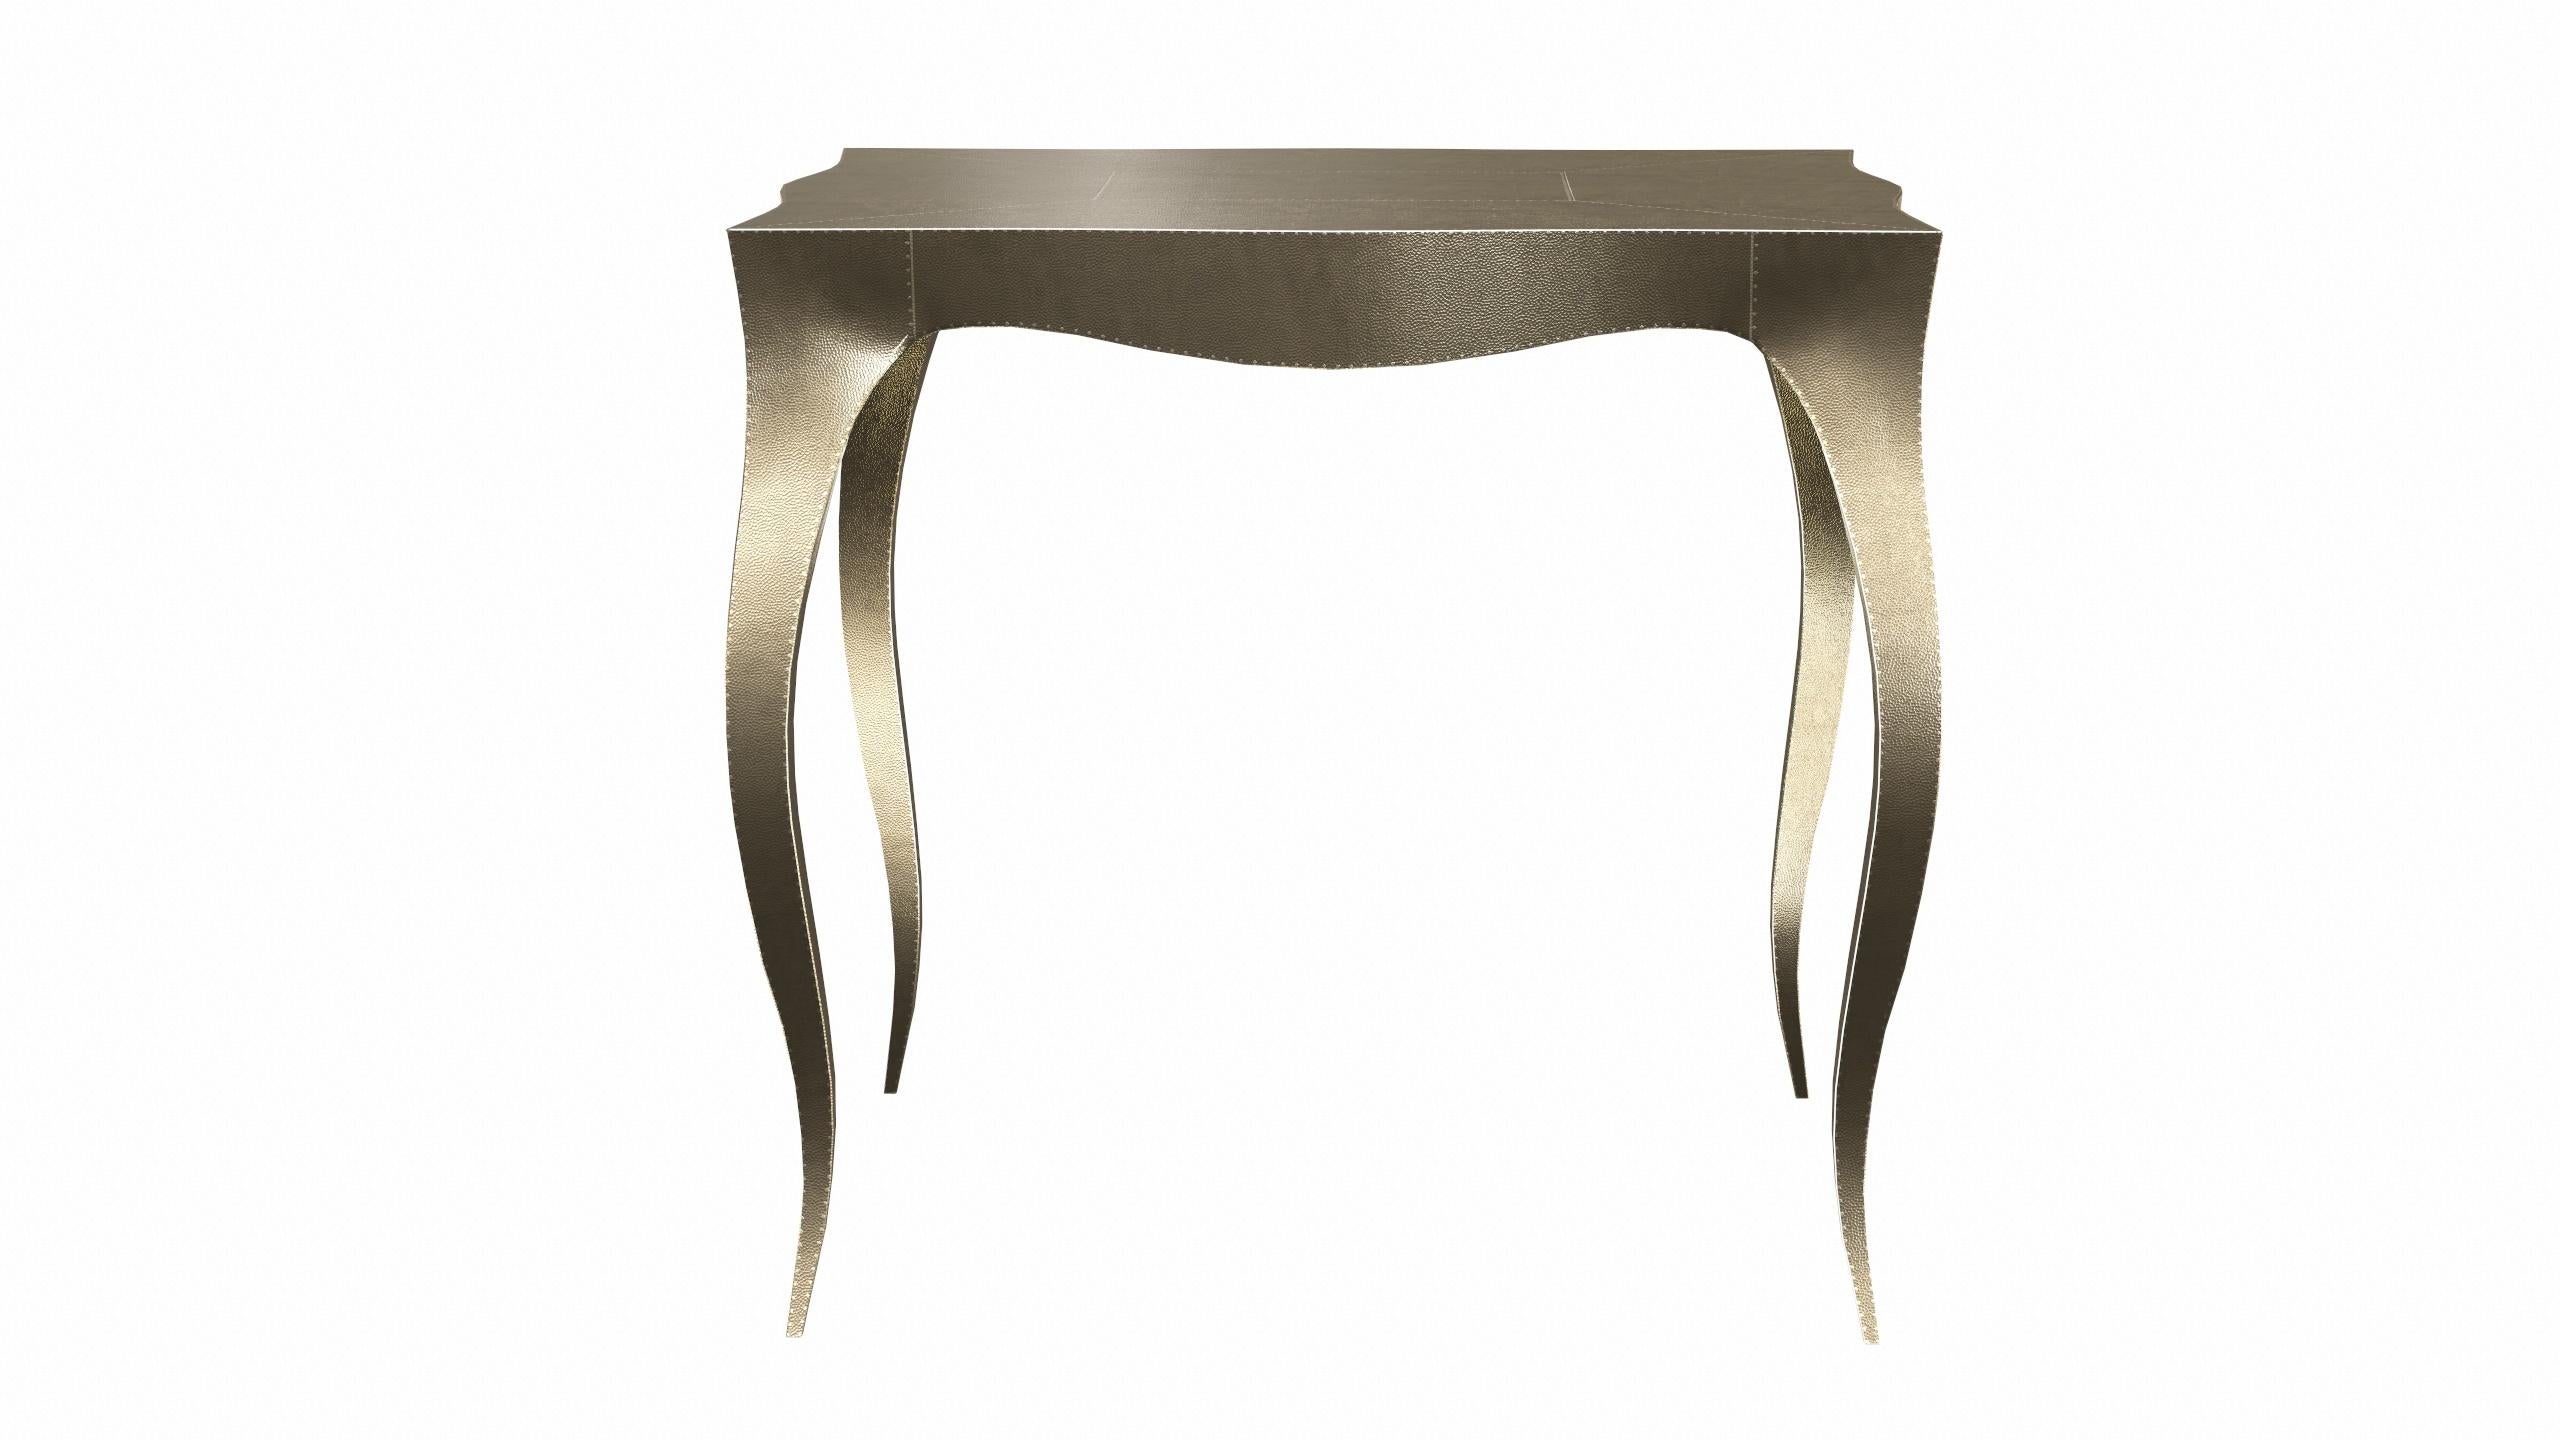 American Louise Art Nouveau Vanities Tables Mid. Hammered Brass by Paul Mathieu For Sale